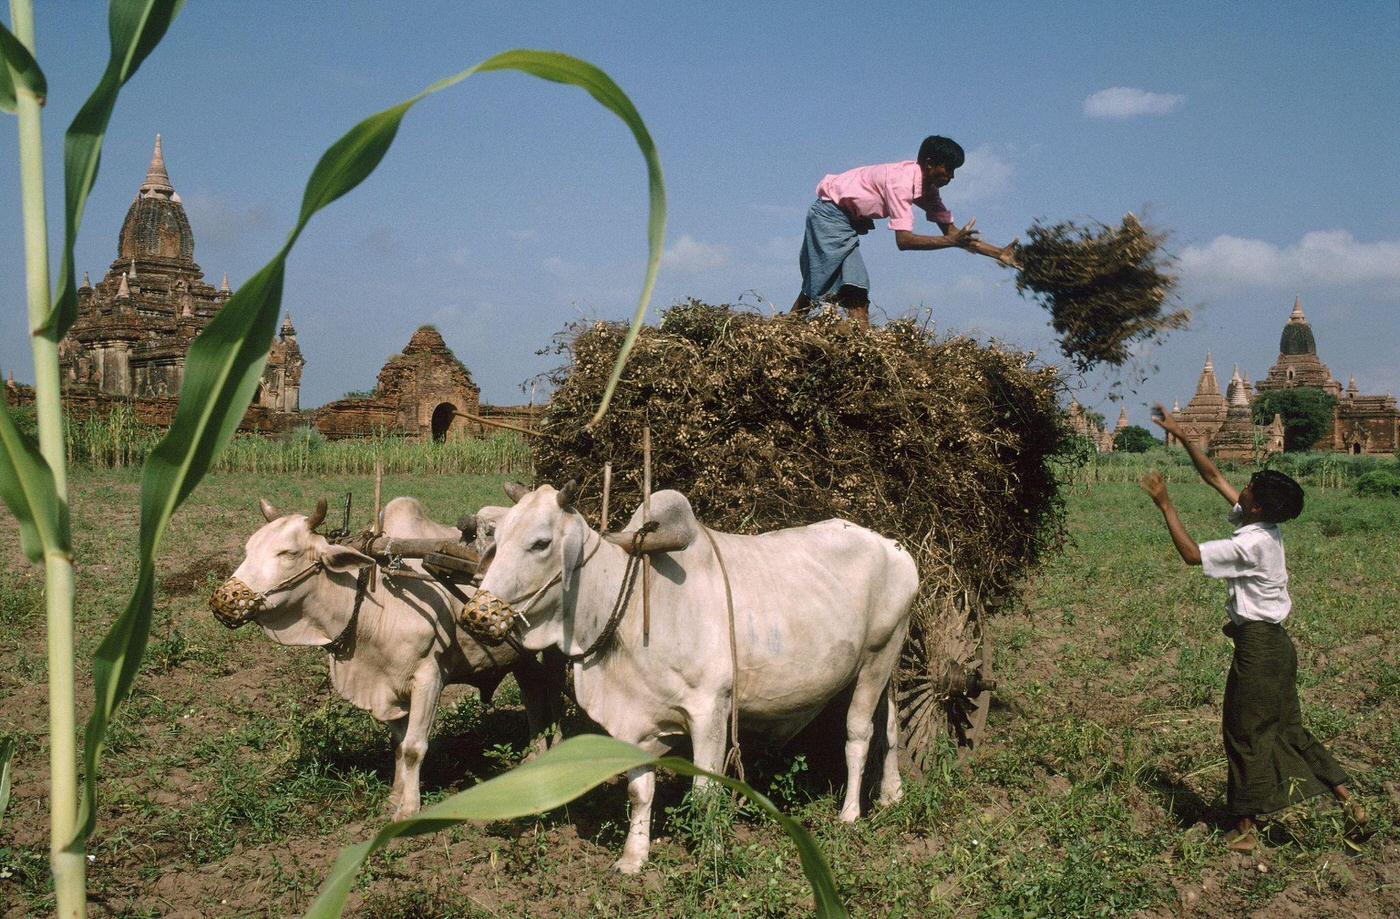 Bagan, Myanmar - Harvesting Among the Ruins of the Ancient City, 1980s